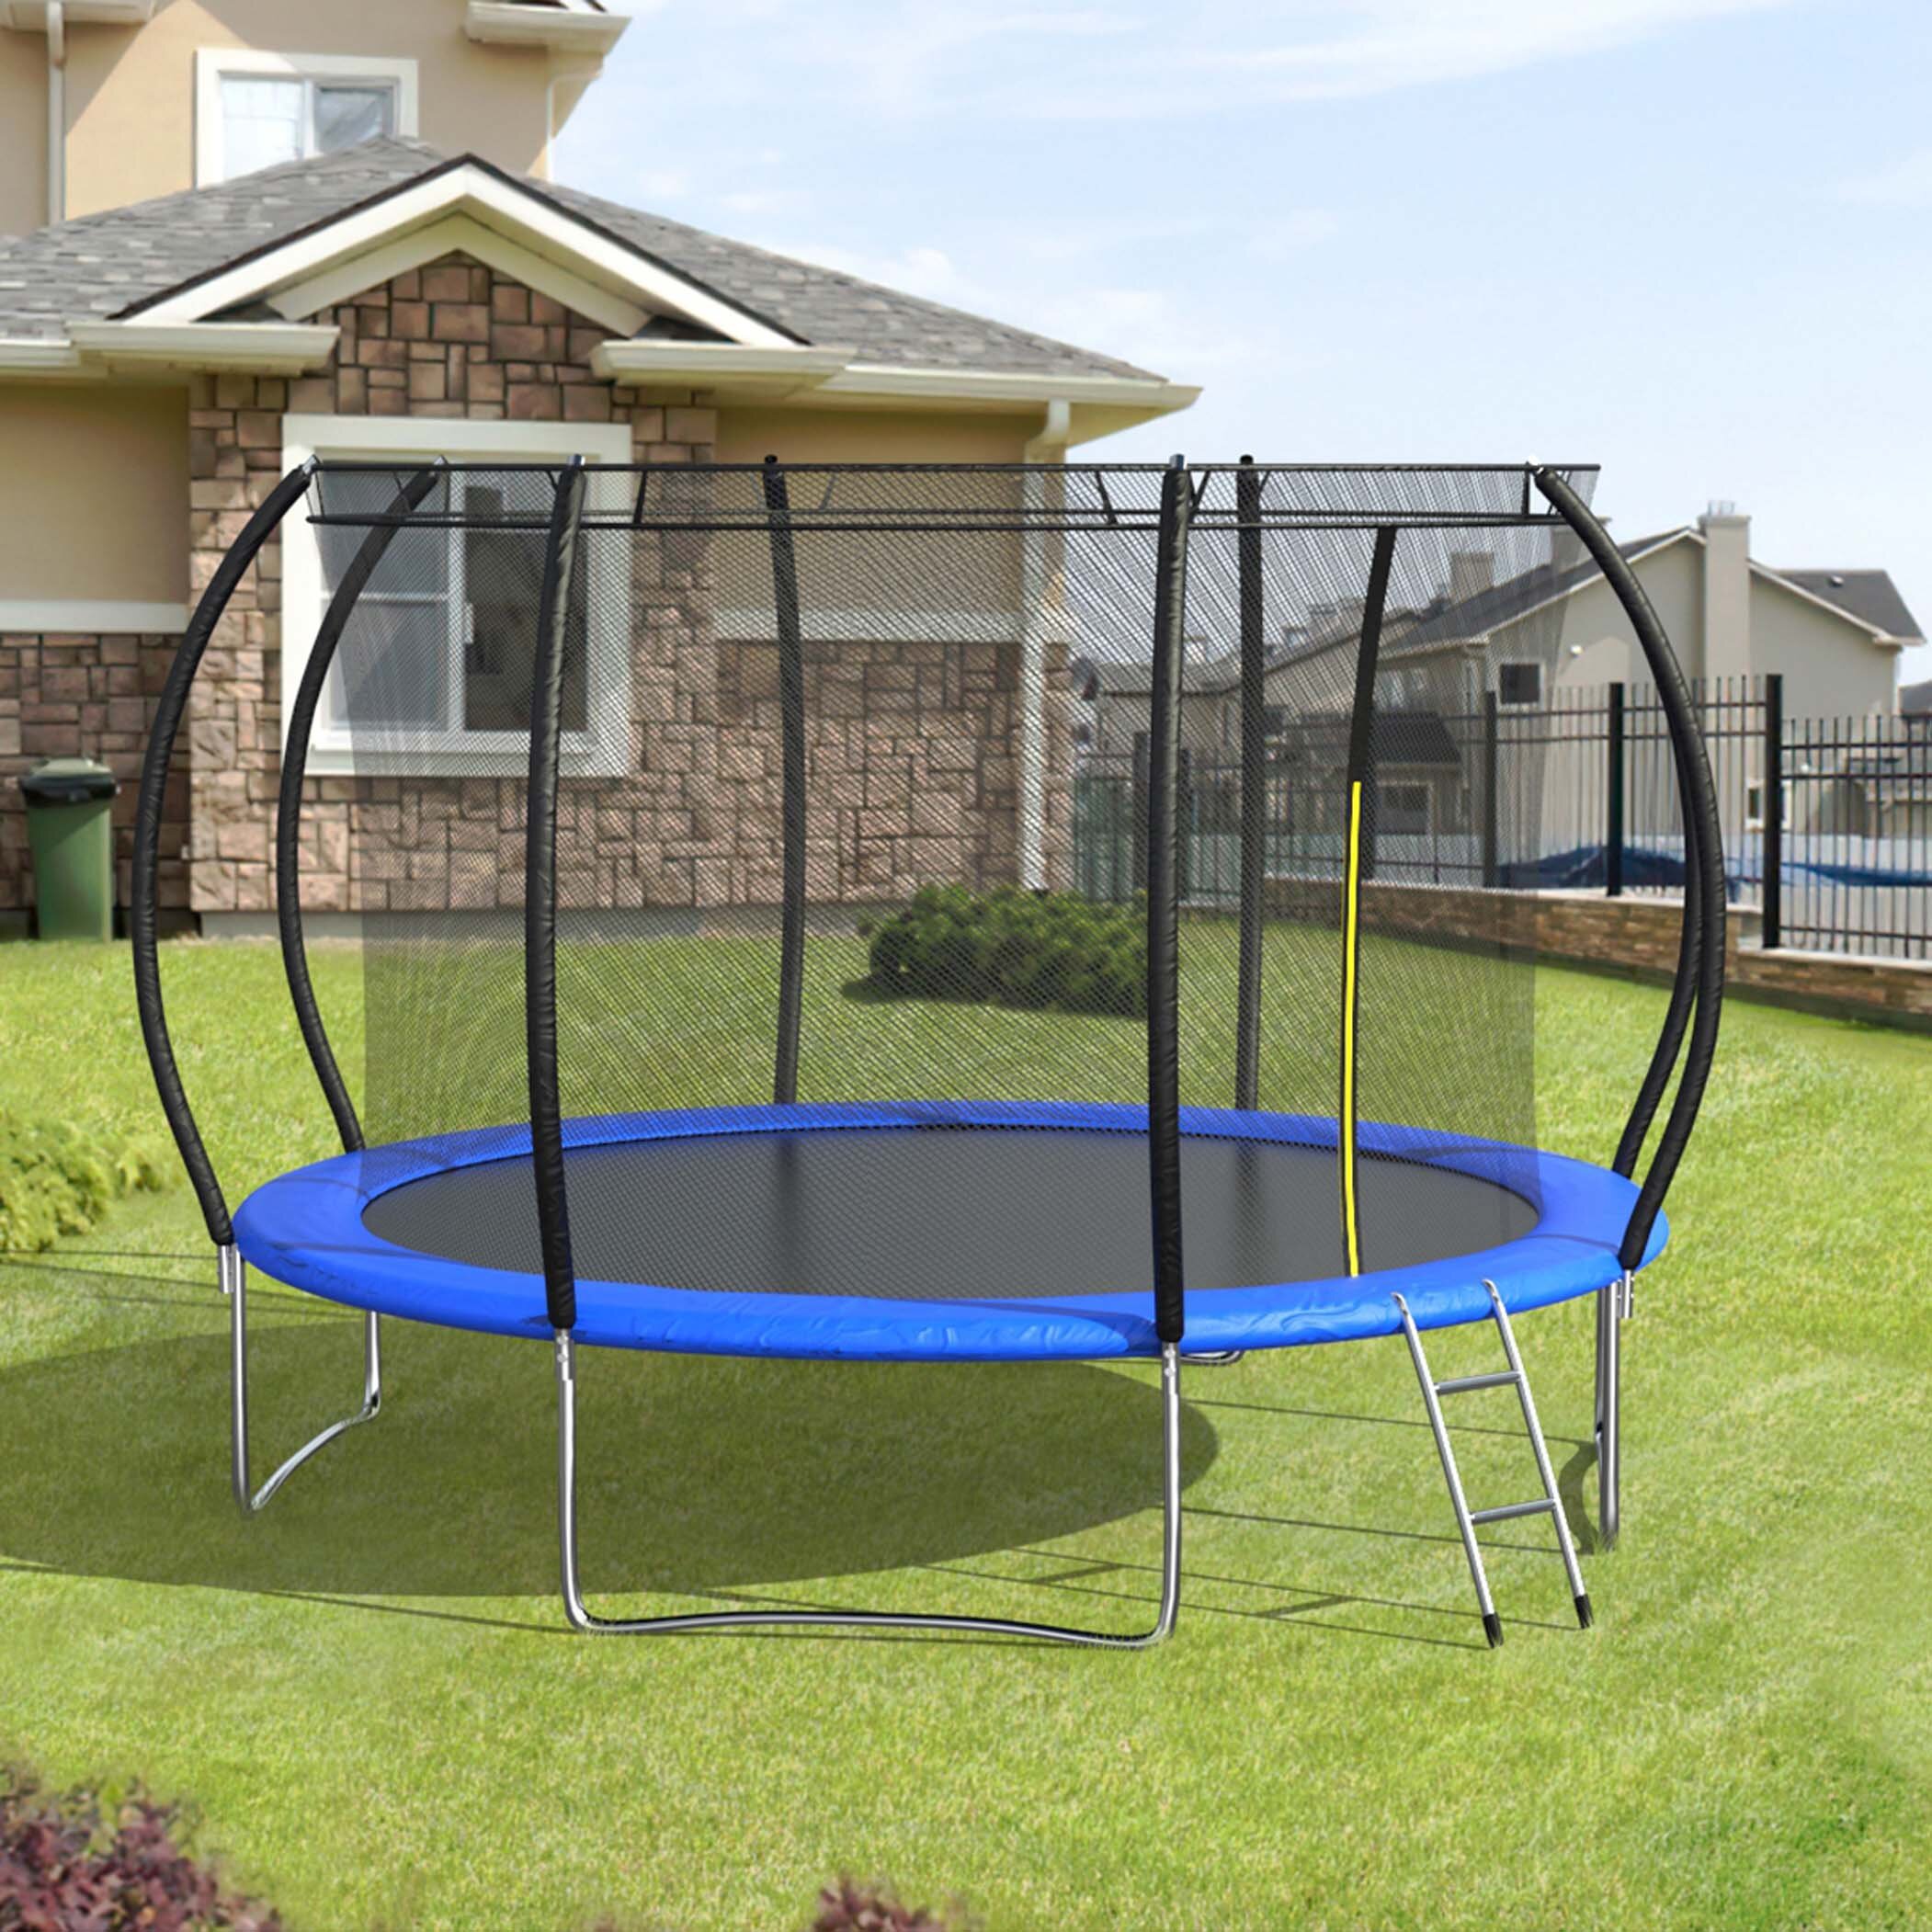 NEW 12FT Trampoline Combo Bounce Jump Safety Enclosure Net w/Spring Pad Ladder 